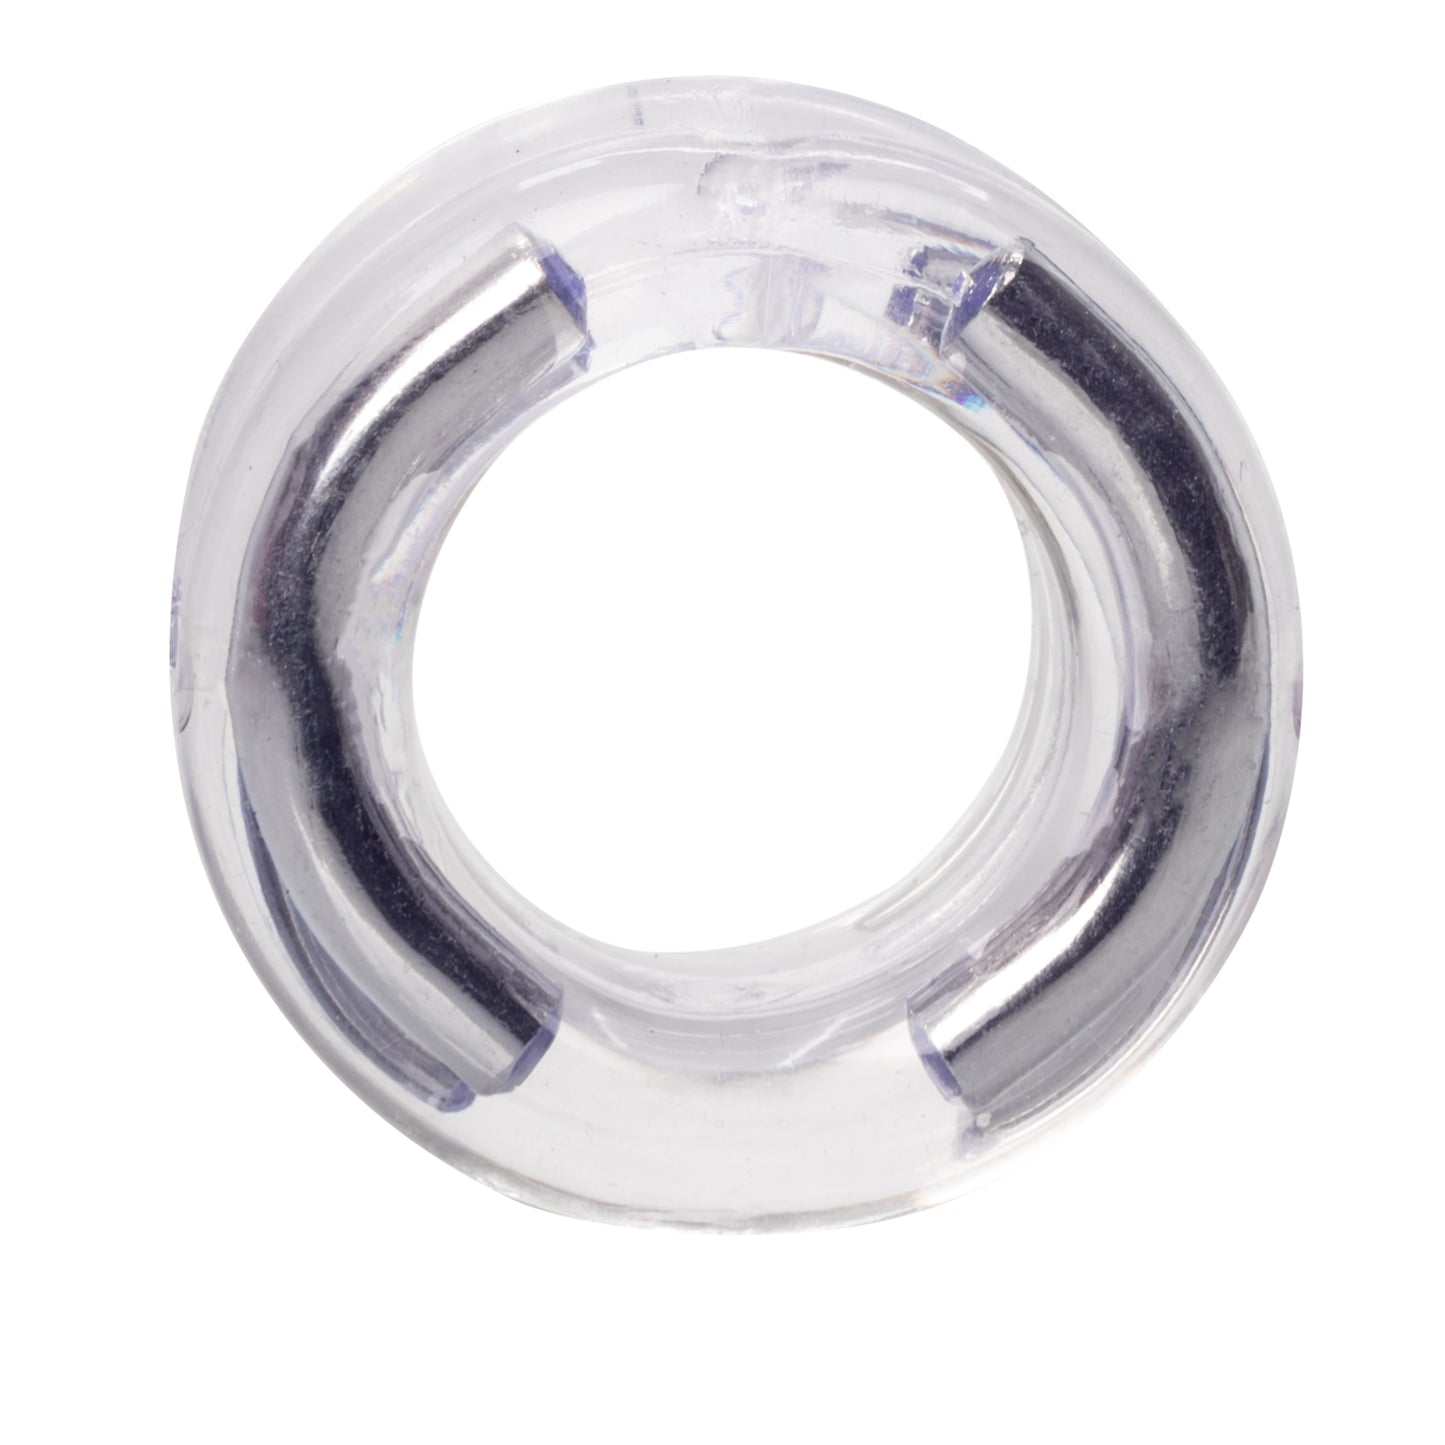 Support Plus® Double Stack Ring